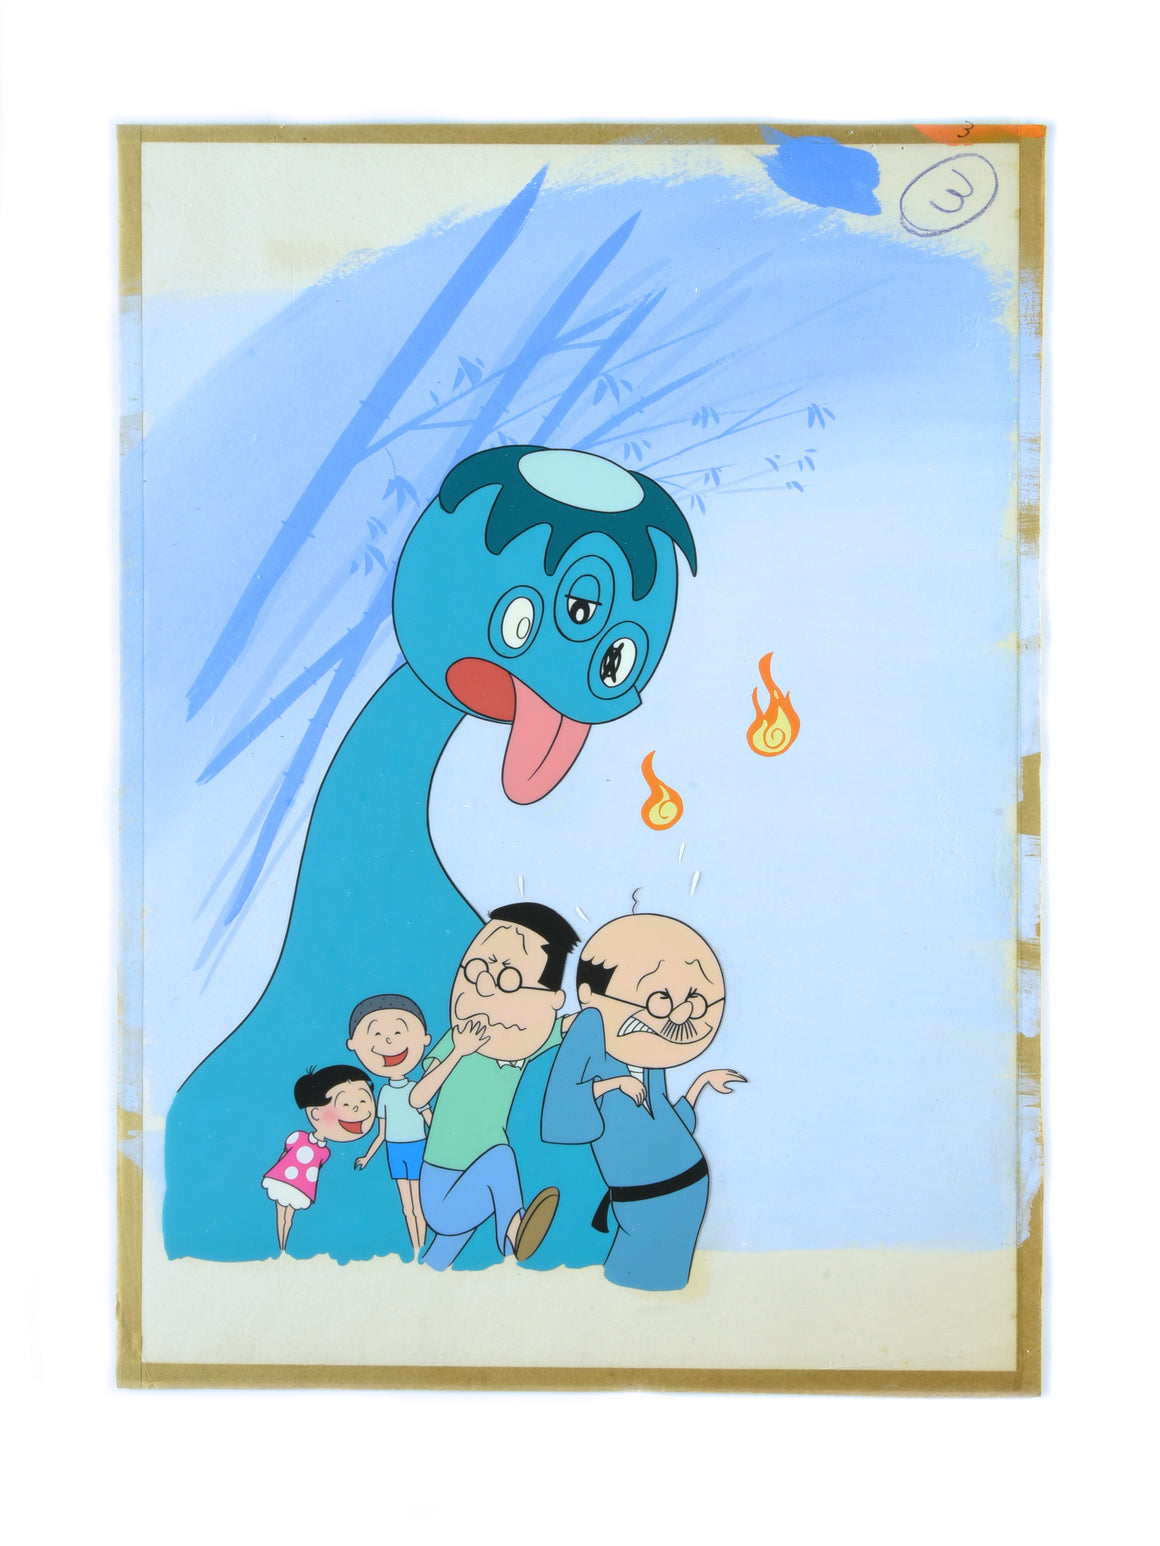 Sazae-san - Namihei and Masuo getting scared at the haunted house - Hanken Cel w/ Matching Background and Layout